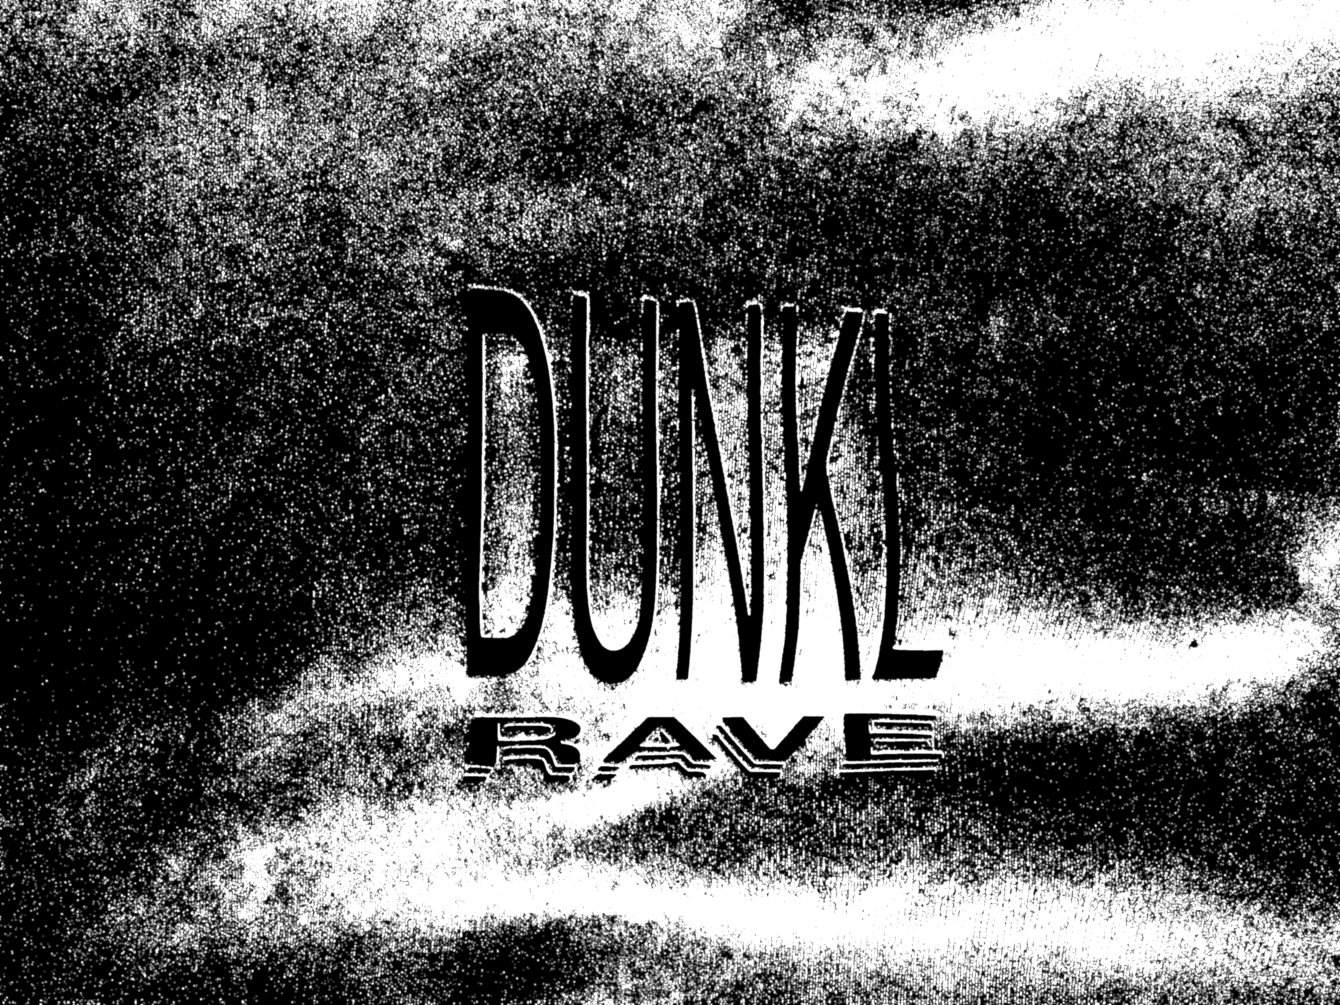 Dunkl with Kaiser, Lifka, Xynia,Casio, Non Reversible, Philip Bader - フライヤー表